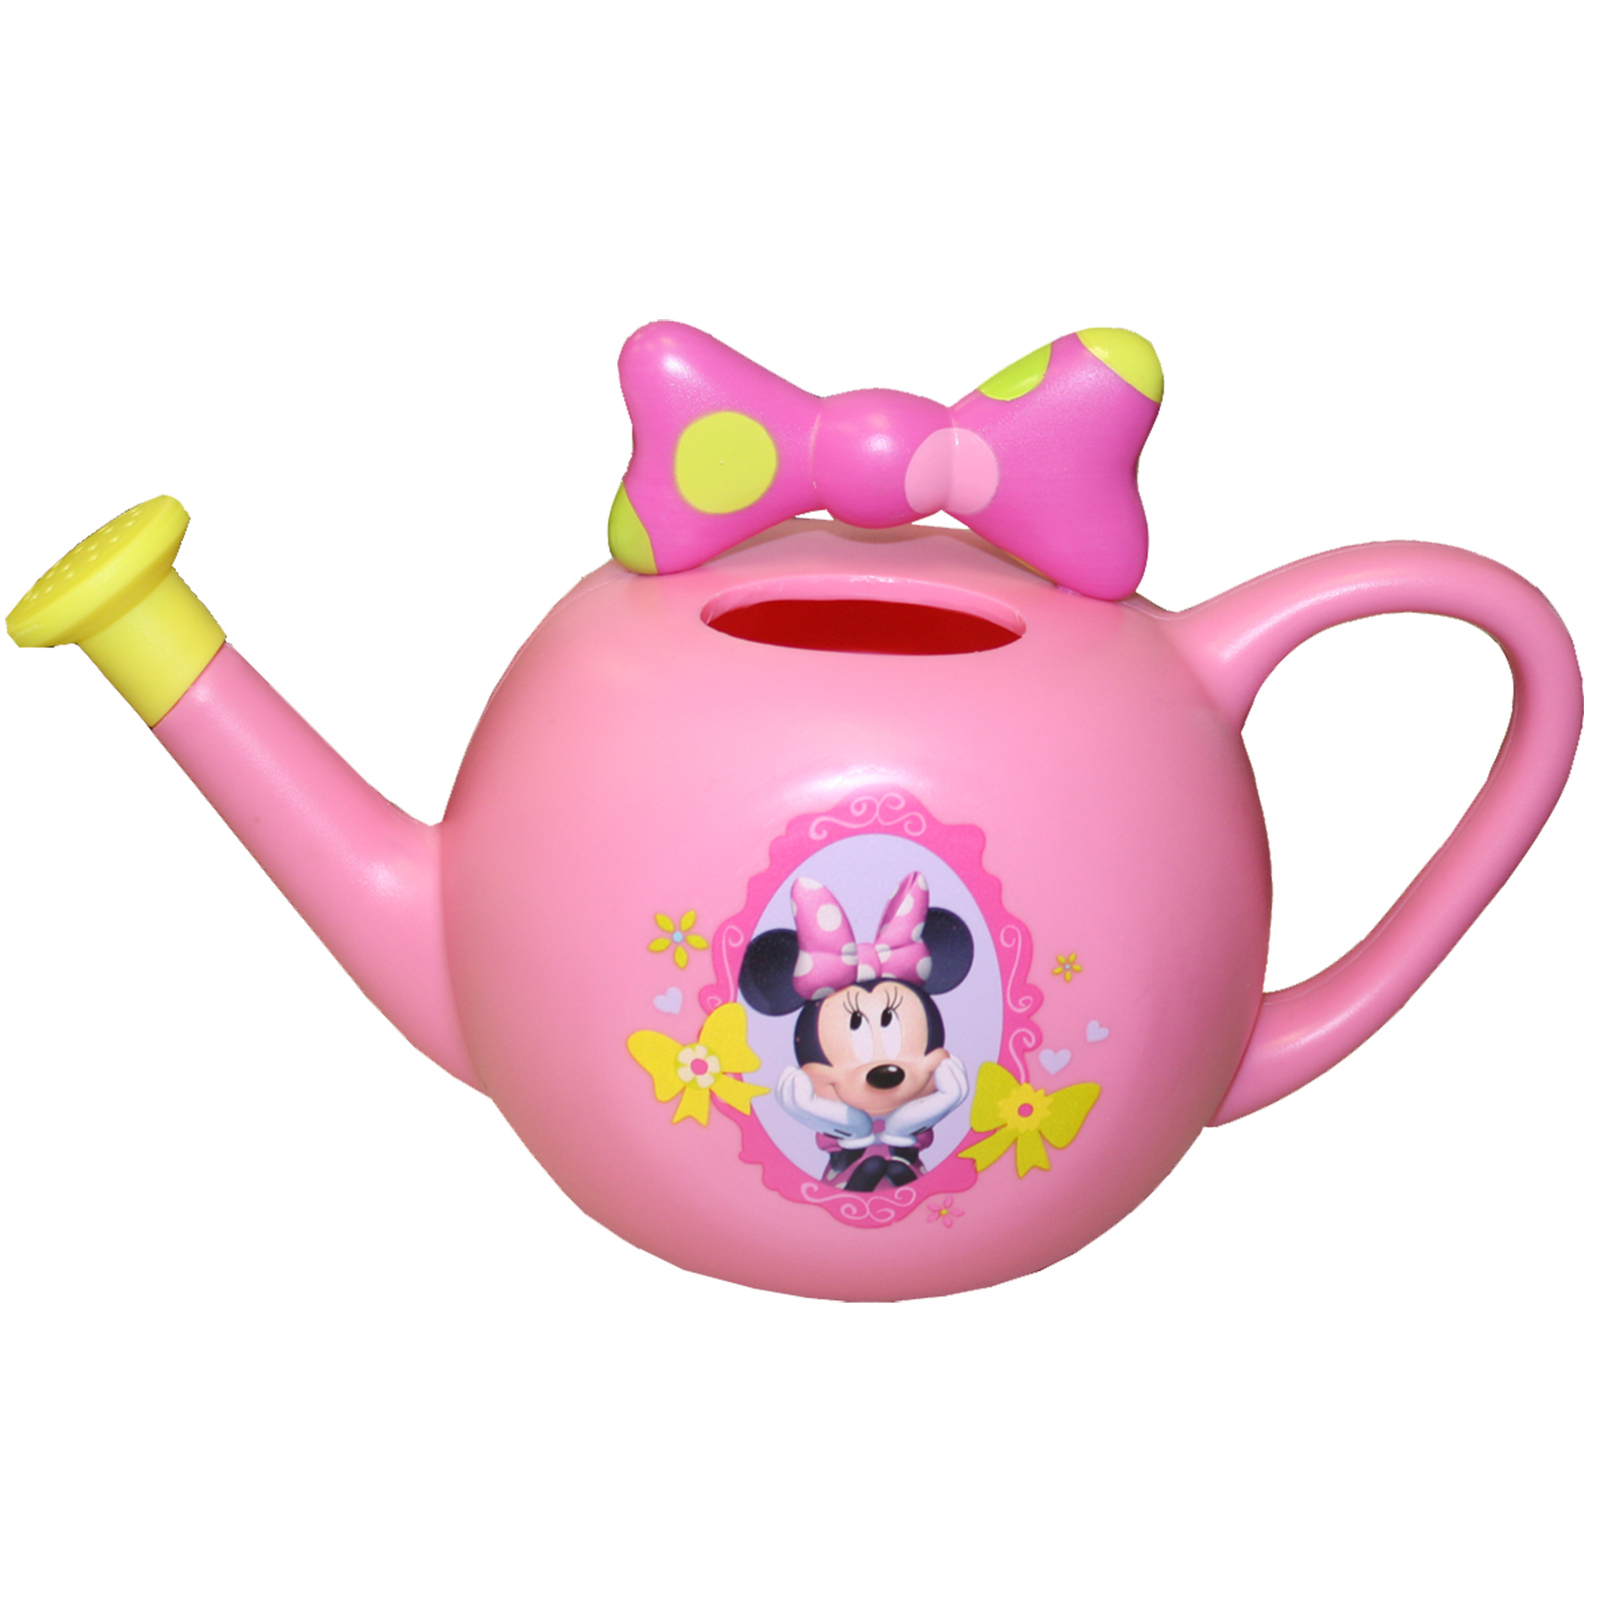 MM420KP Minnie Mouse Watering Can